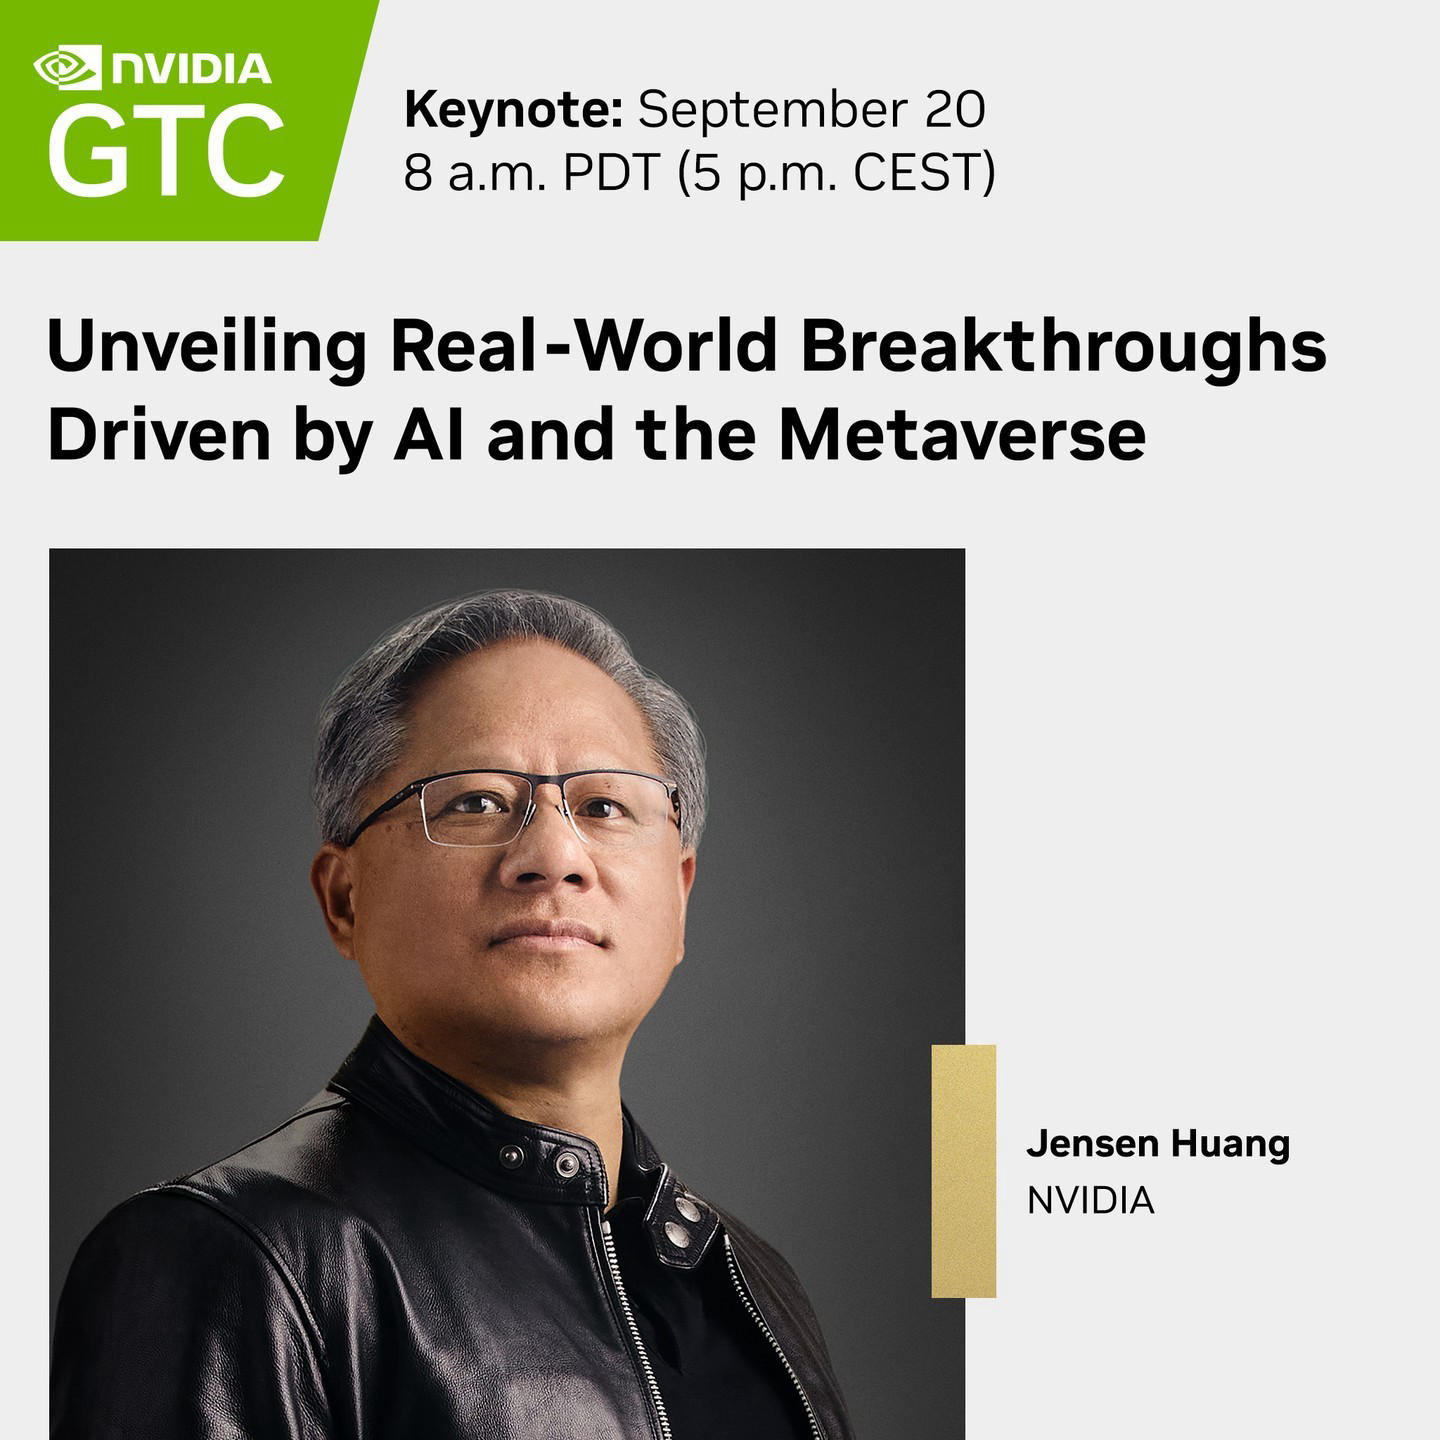 NVIDIA - Save the date for the #GTC22 keynote